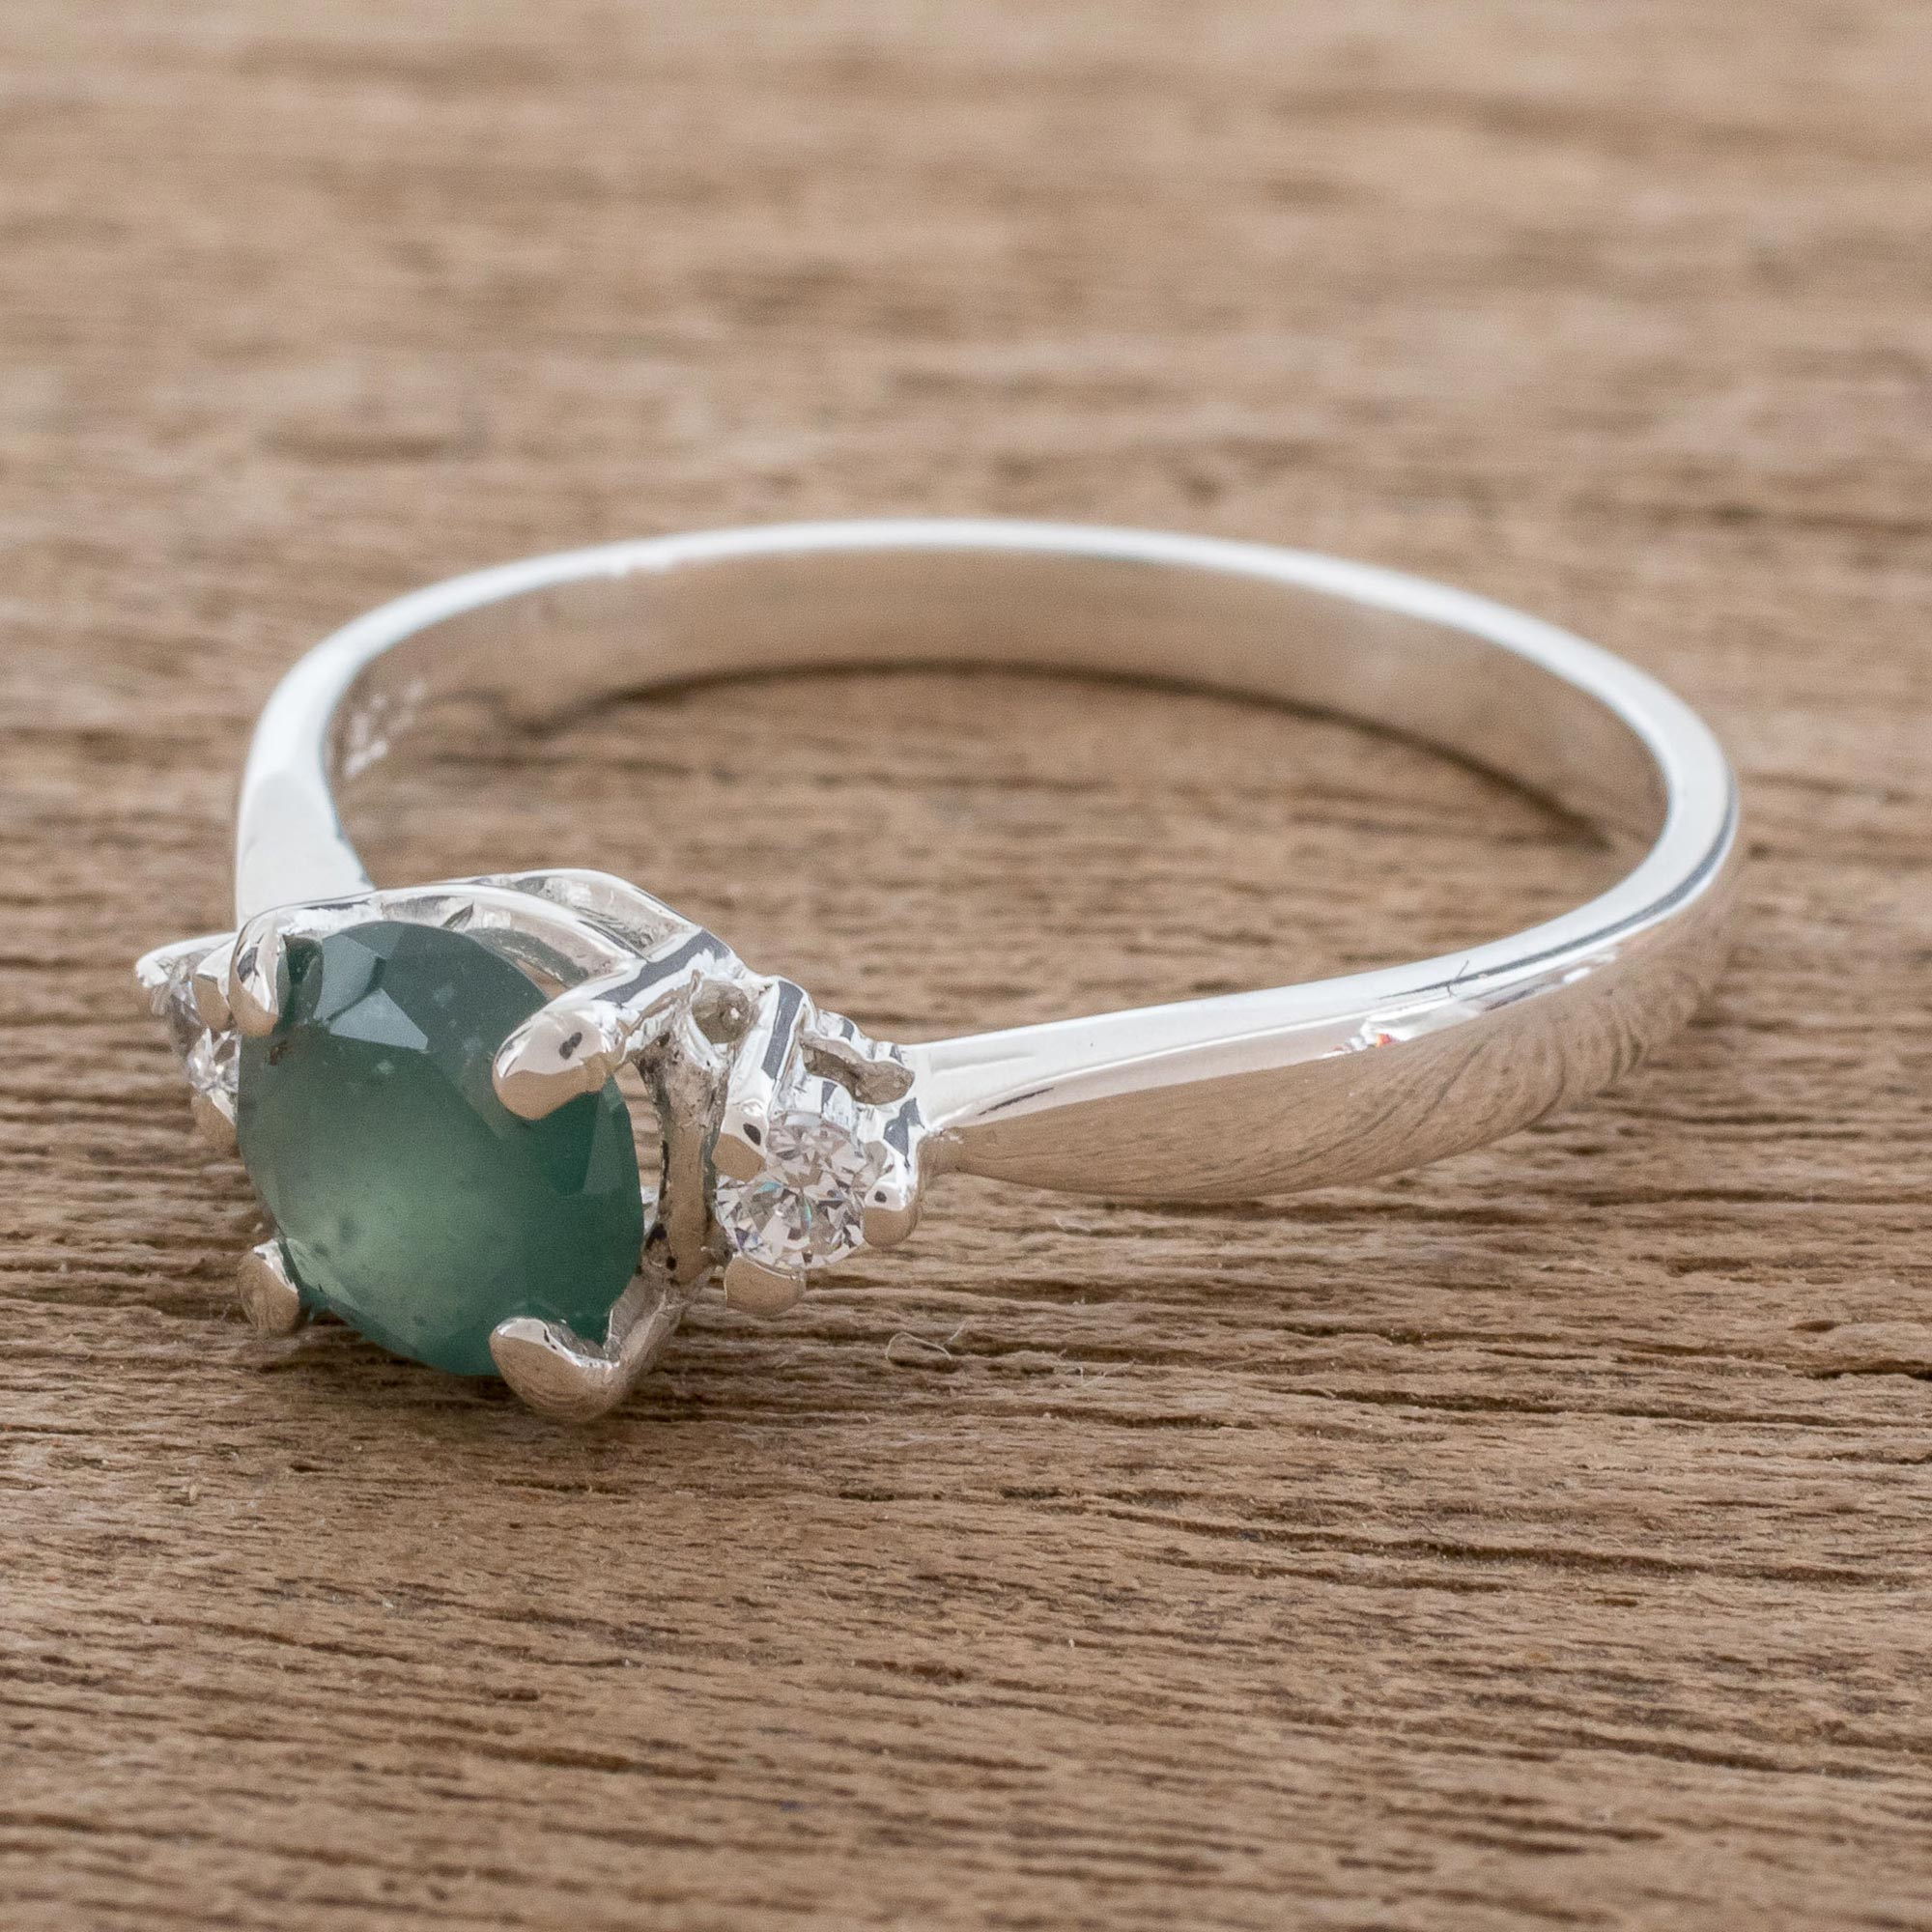 UNICEF Market | Green Jade Solitaire Ring from Guatemala - Age-Old Beauty